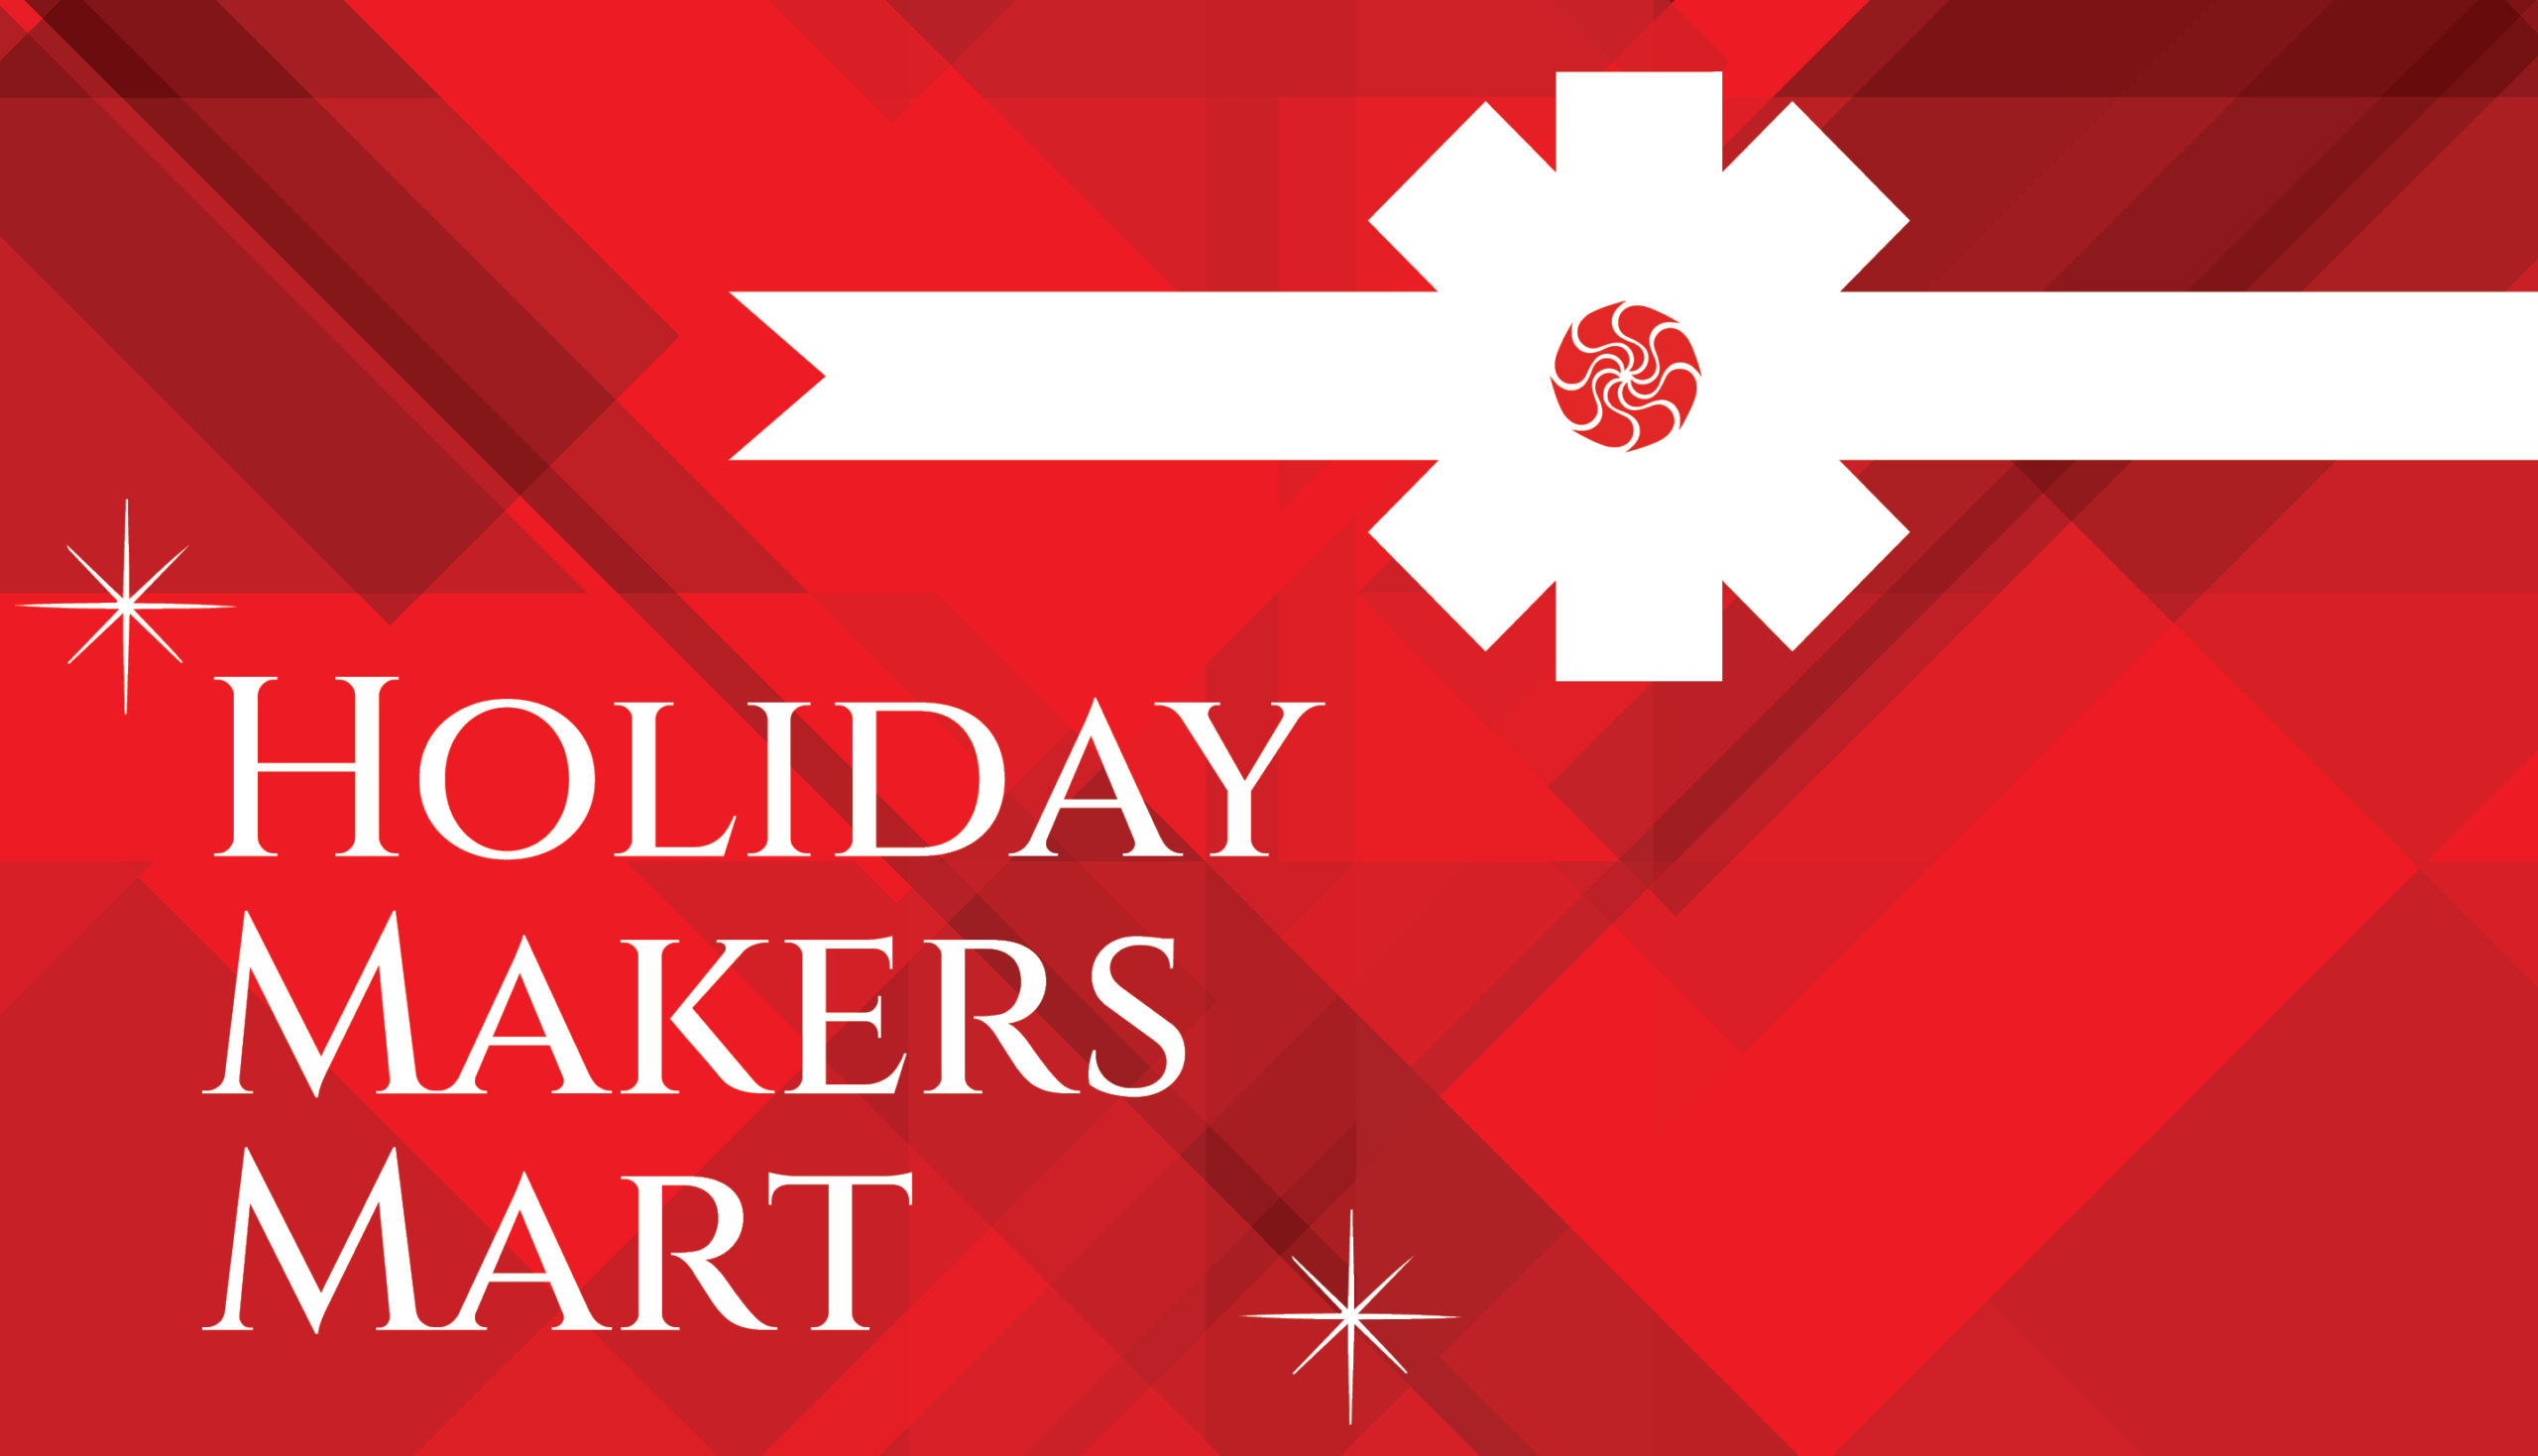 Shop Handcrafts at the Holiday Makers Mart